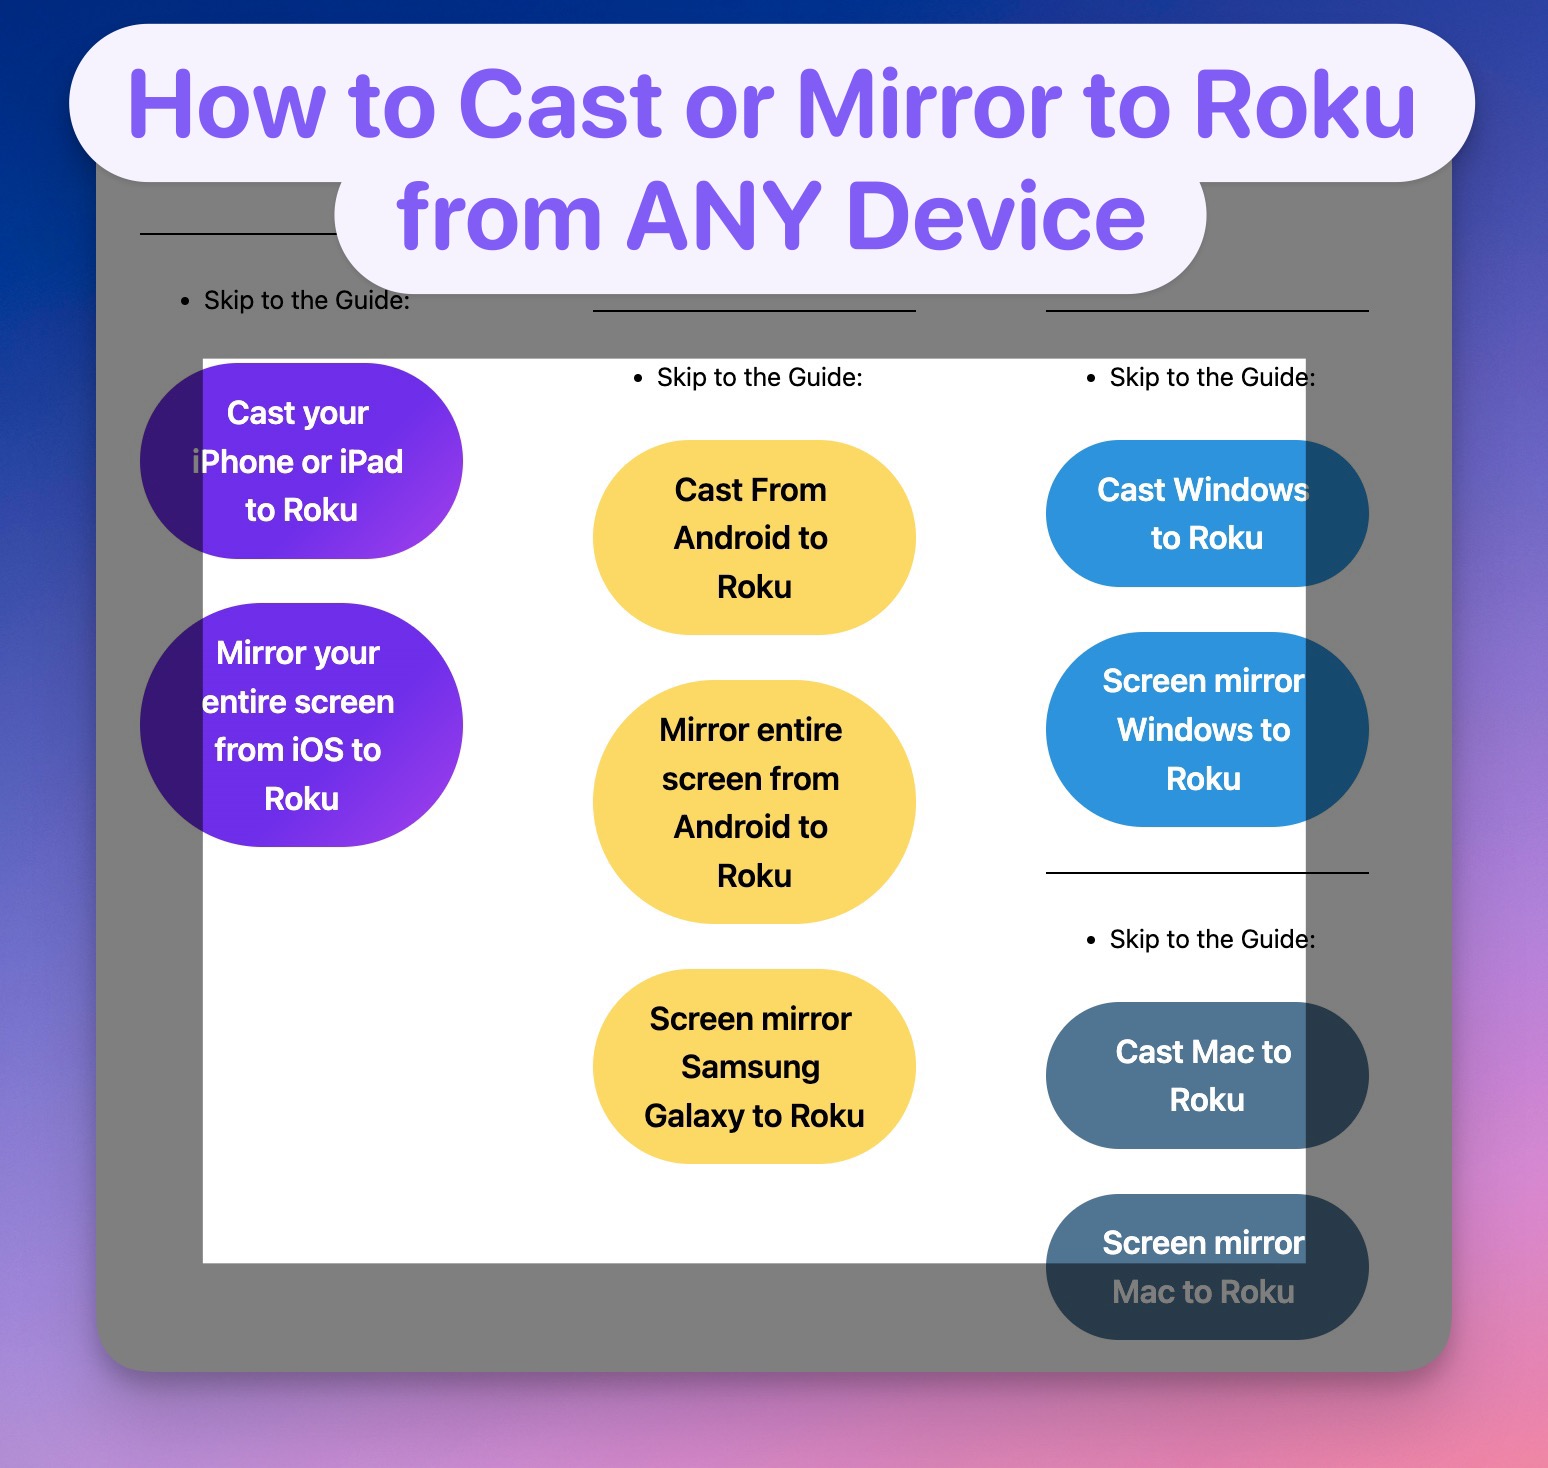 How to Cast to Roku from iPhone, Android, Windows, or Mac